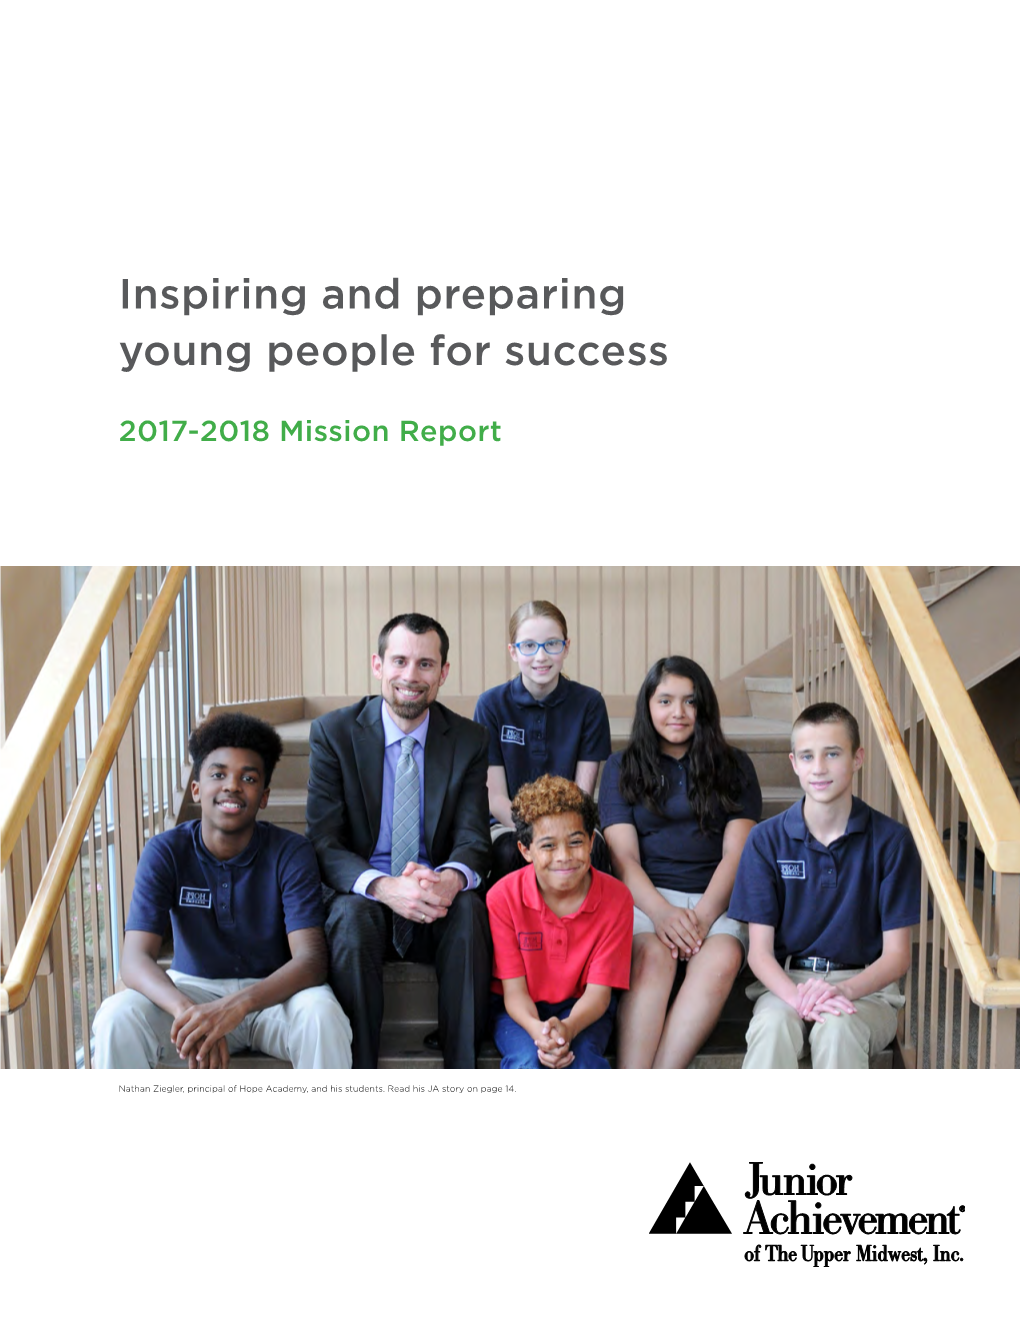 Inspiring and Preparing Young People for Success